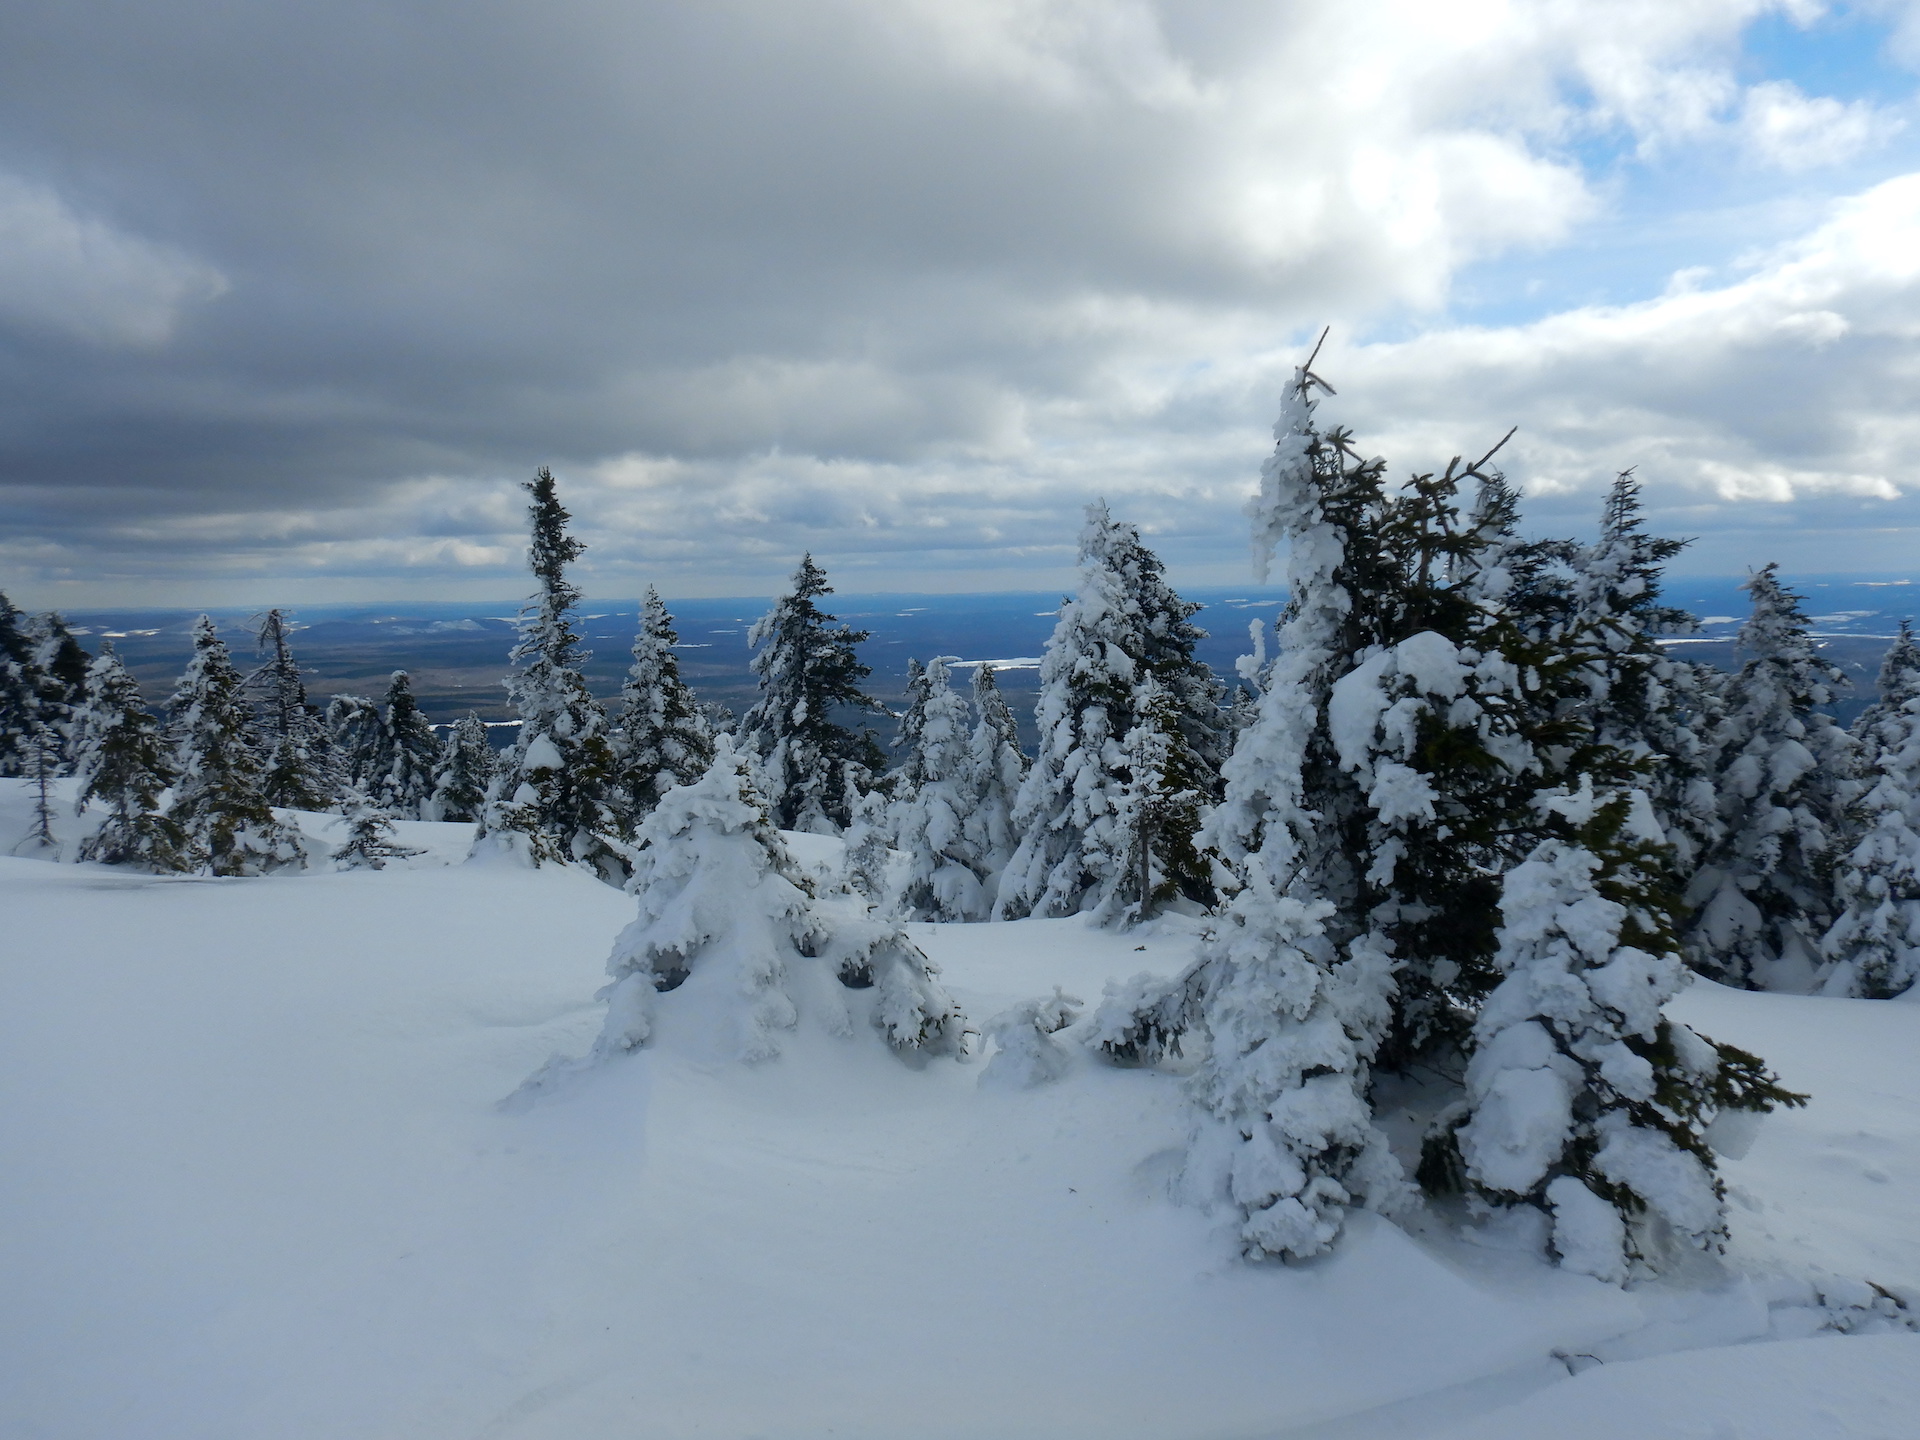 View from a mountain of a forested landscape. Only a sliver of the lowlands are visible. Snow and trees fill the fore and middle ground. The trees are snow covered, especially on their left side.